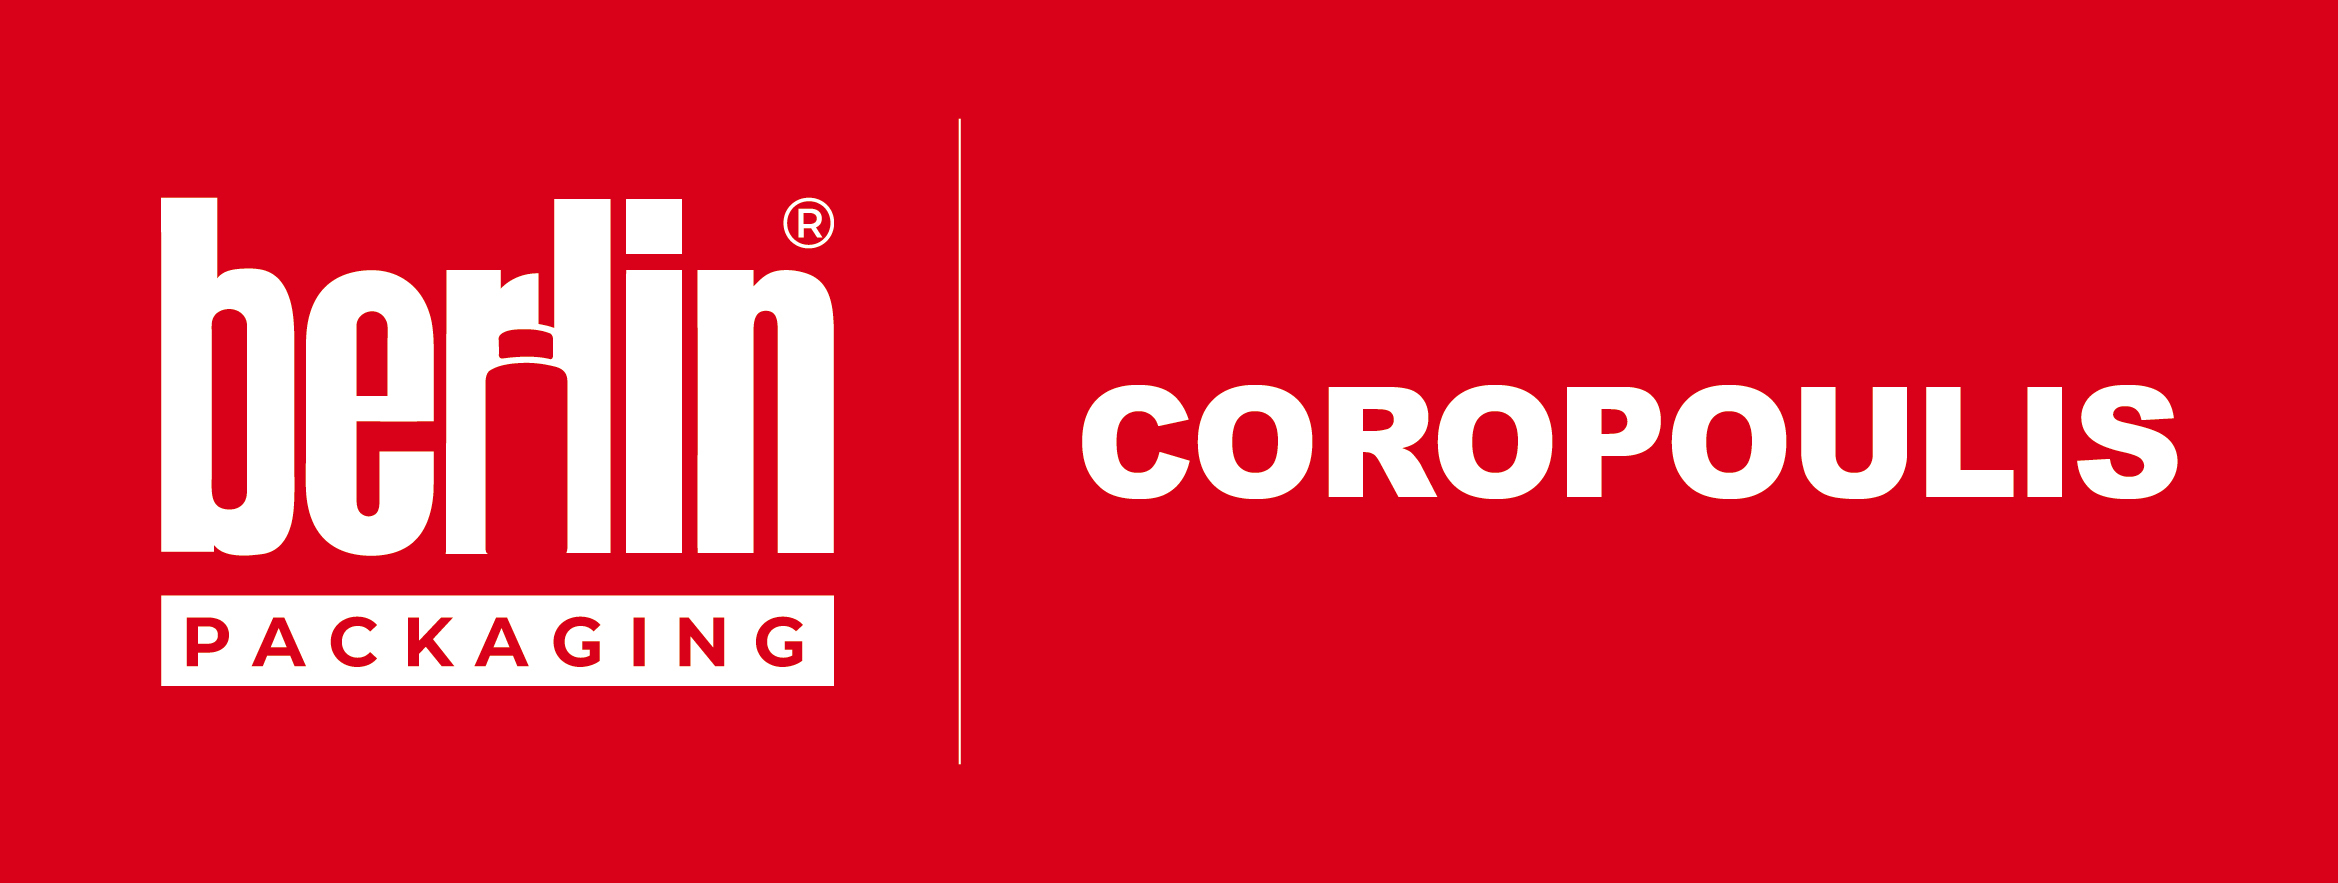 Coropoulis Packaging SA with single shareholder